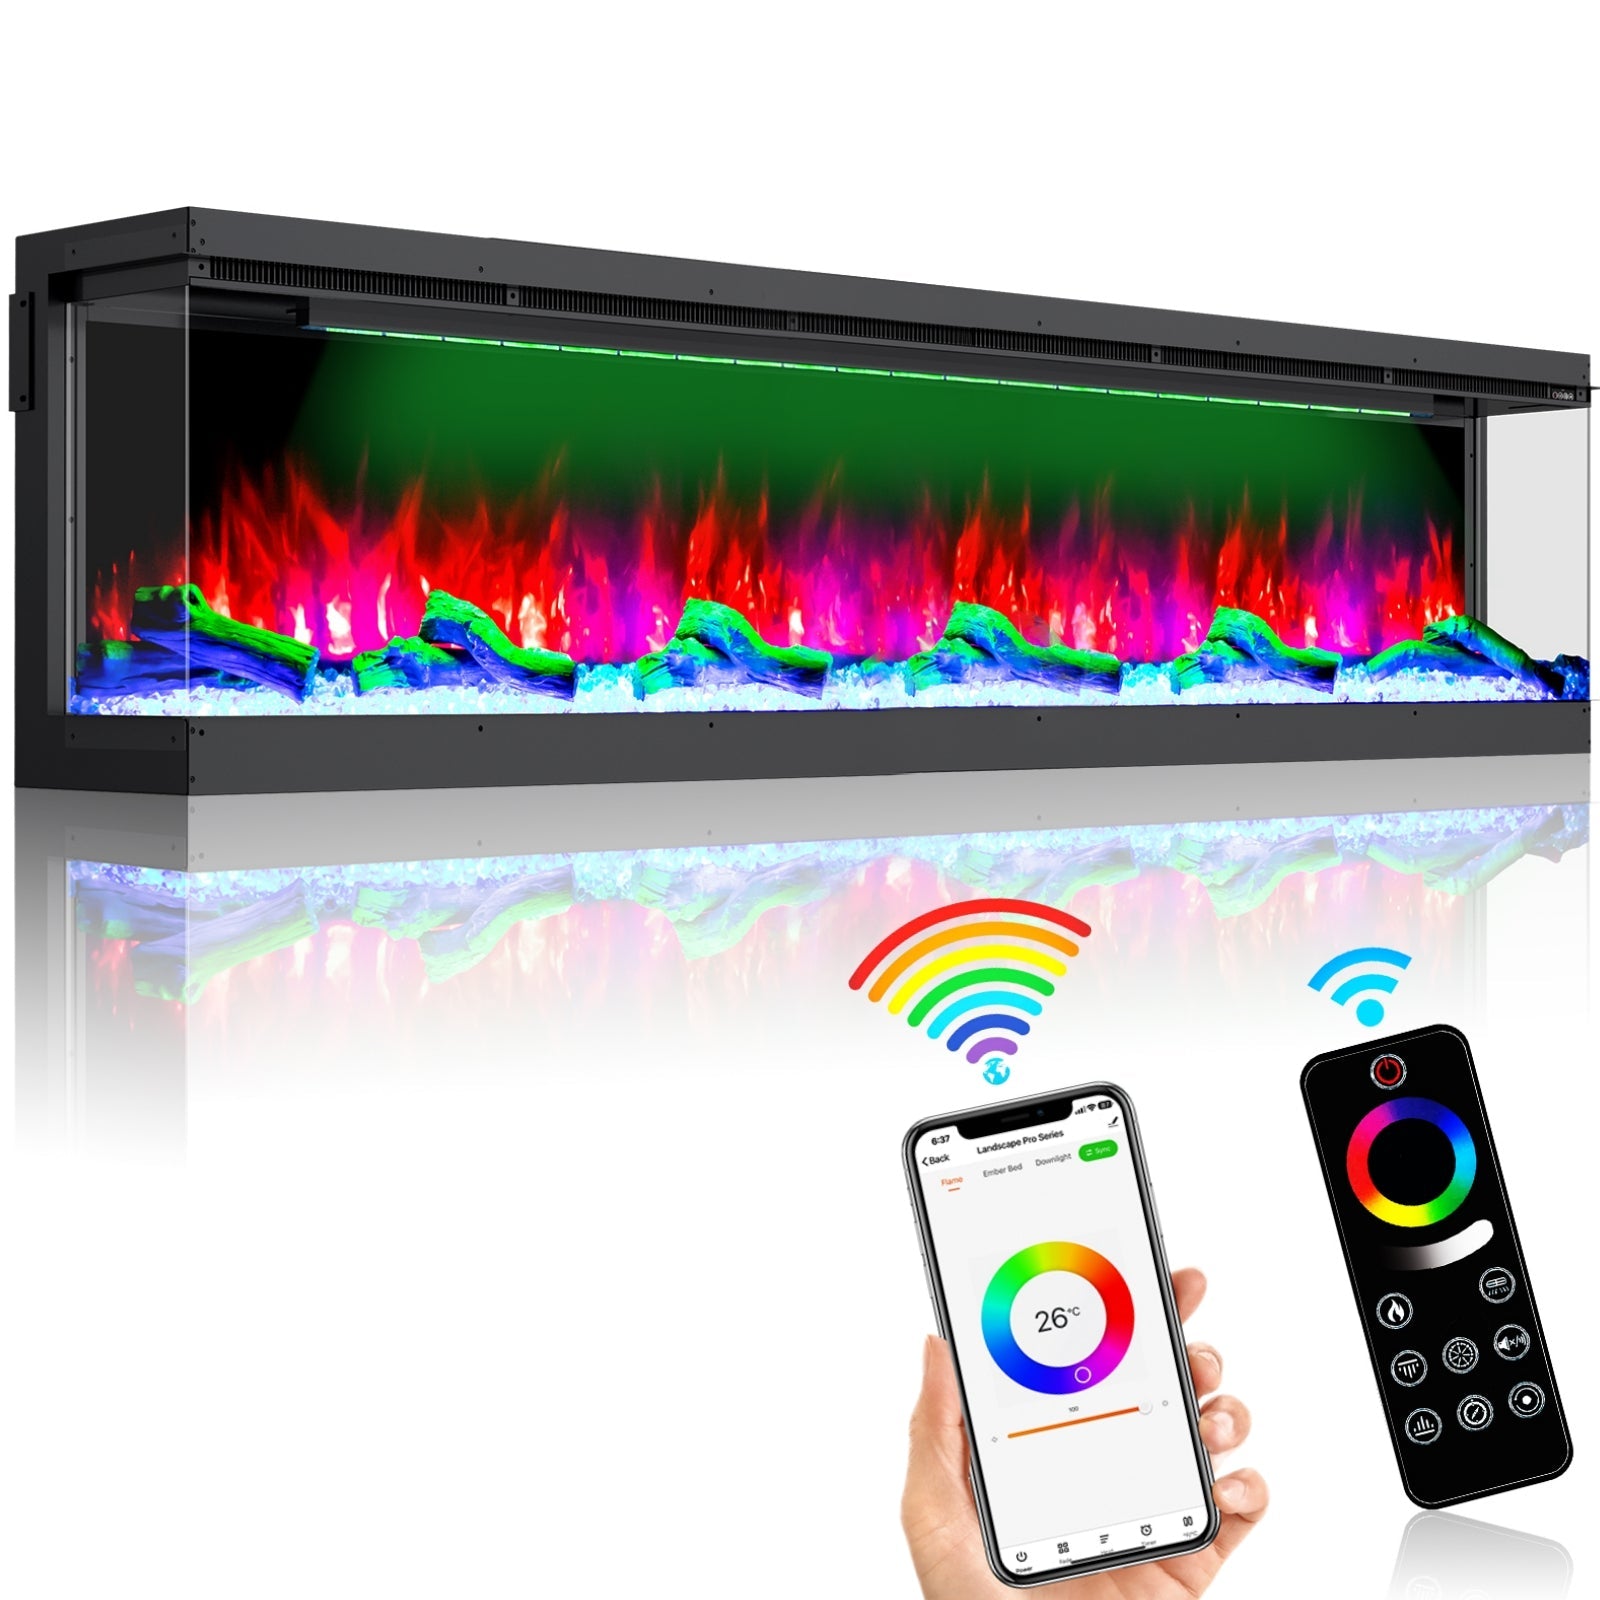 Recessed 3-Sided Electric Fireplace, 70-inch Smart WiFi 251 Flame Colors Combination Inserts Eletric Fire Place Heater for Living Room Indoor Use with Remote Control, Log & Crystals, Black